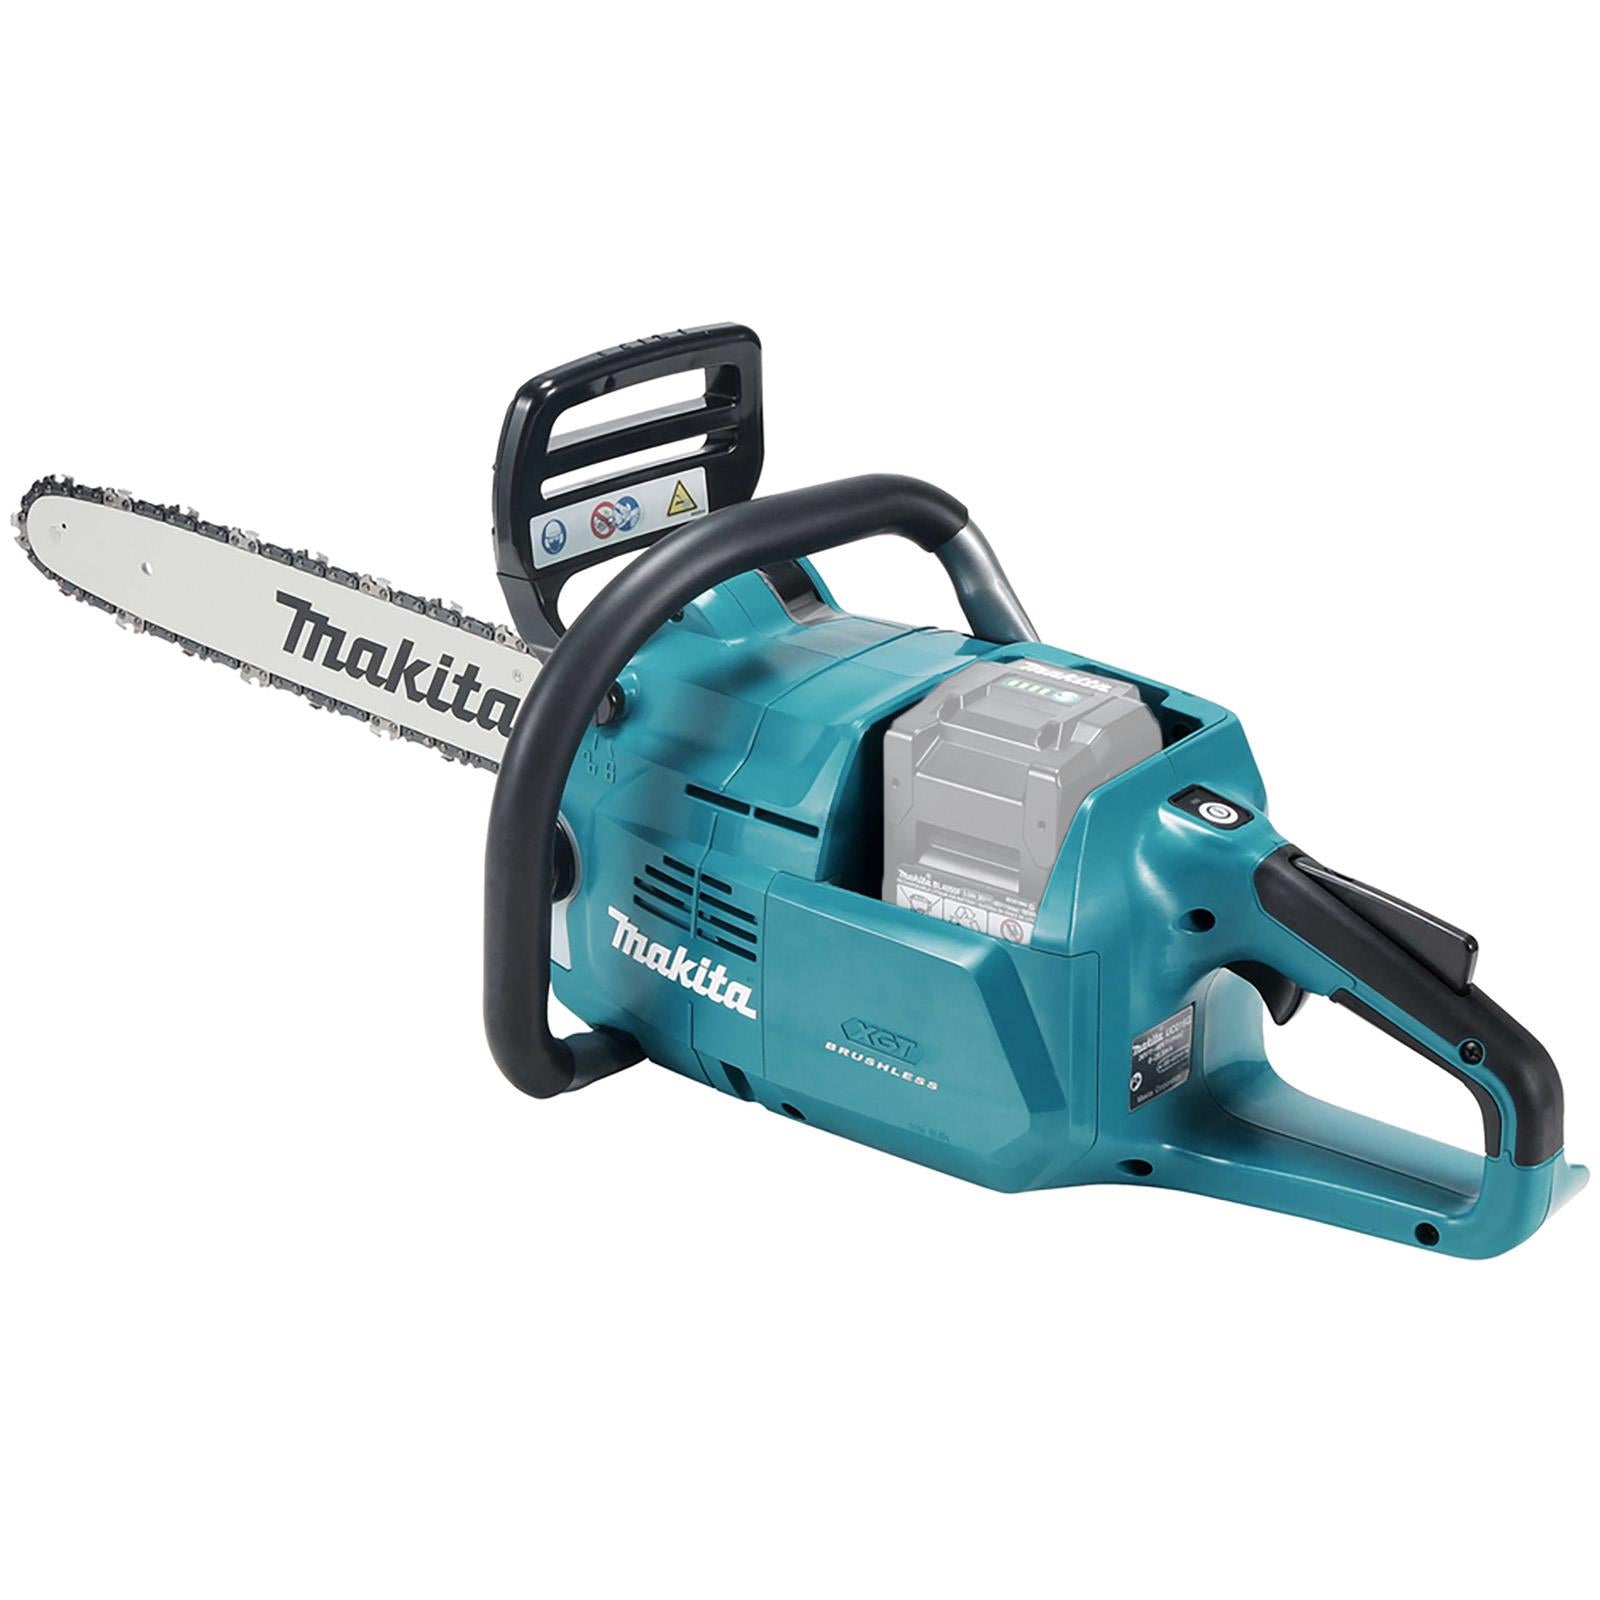 Makita Chainsaw 40cm Heavy Duty 16" 40V XGT Brushless Cordless Garden Tree Cutting Pruning Bare Unit Body Only UC016GZ